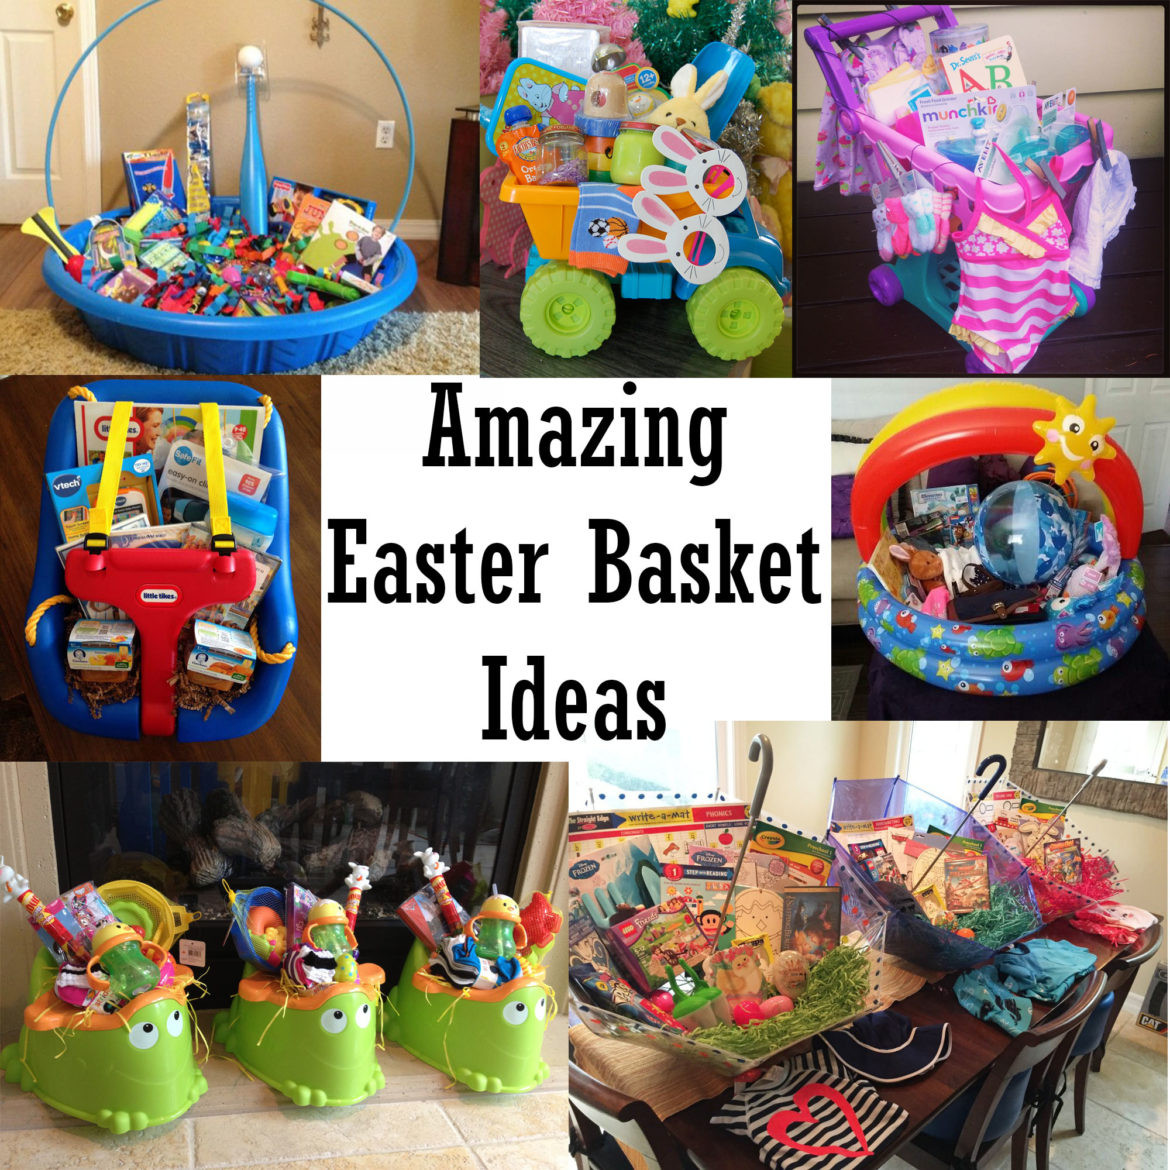 Gift Ideas For Easter Baskets
 Amazing Easter Basket Ideas The Keeper of the Cheerios